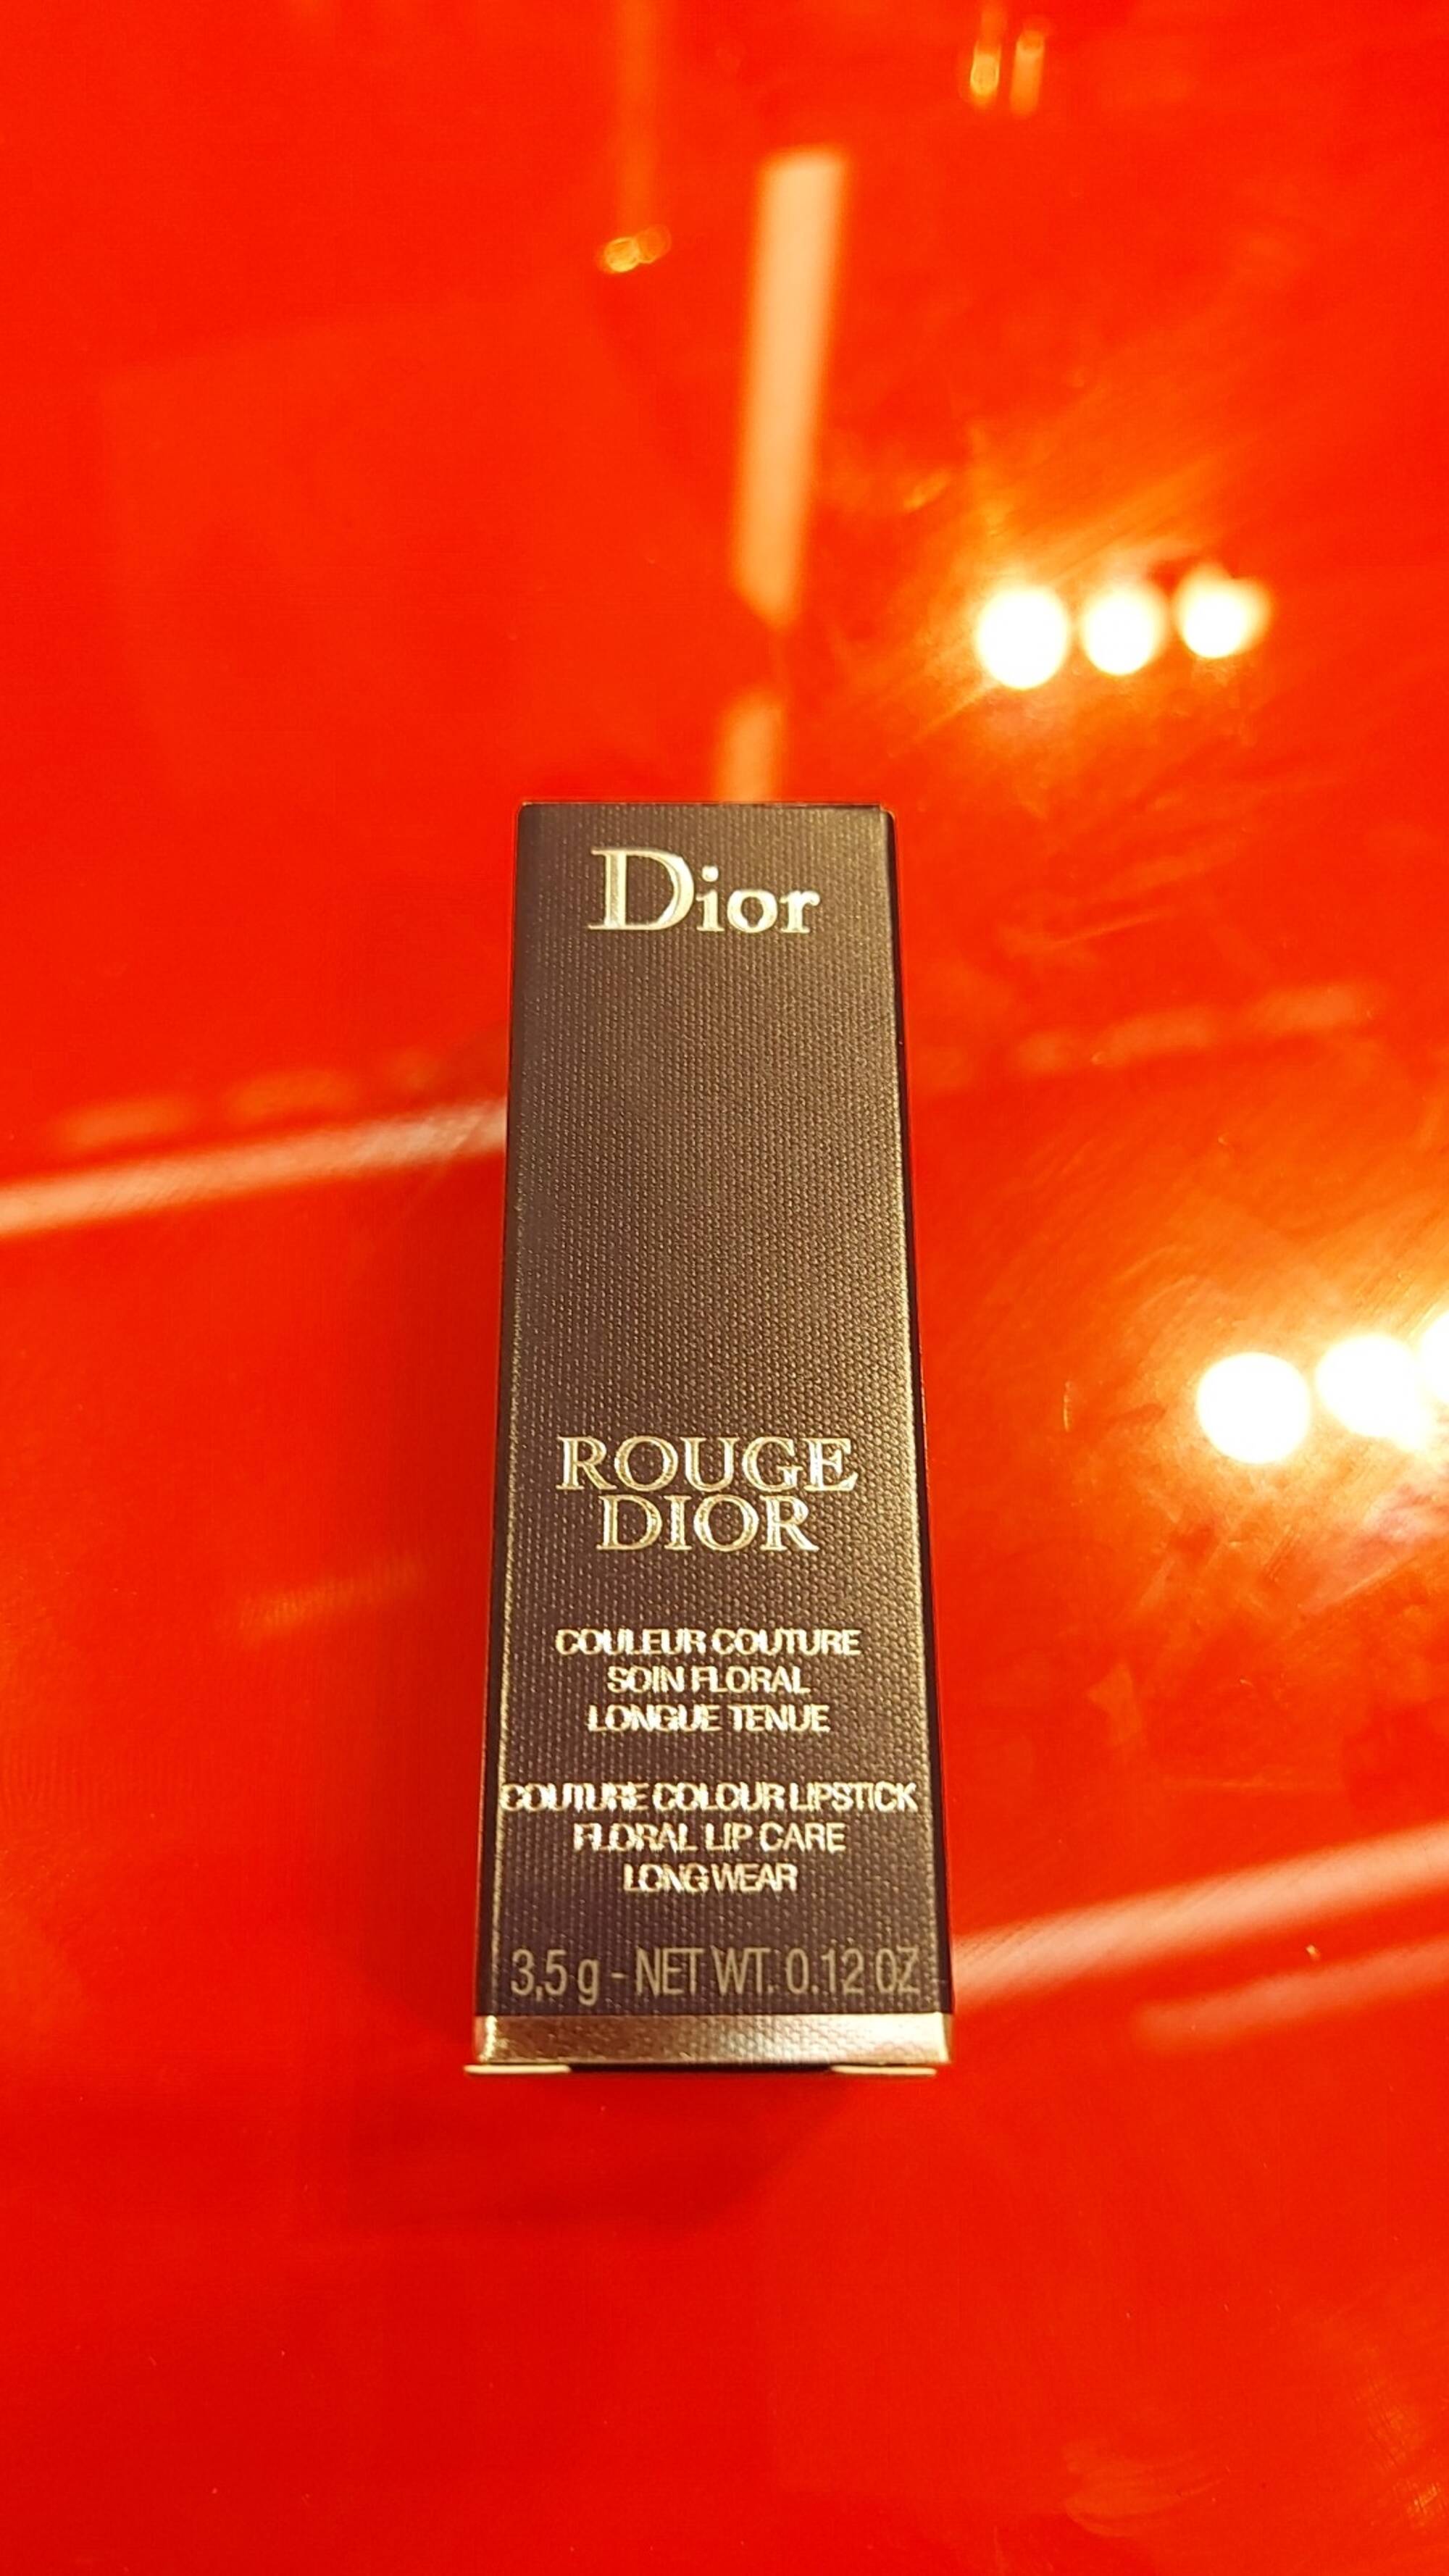 CHRISTIAN DIOR - Rouge dior - Couleur couture soin floral